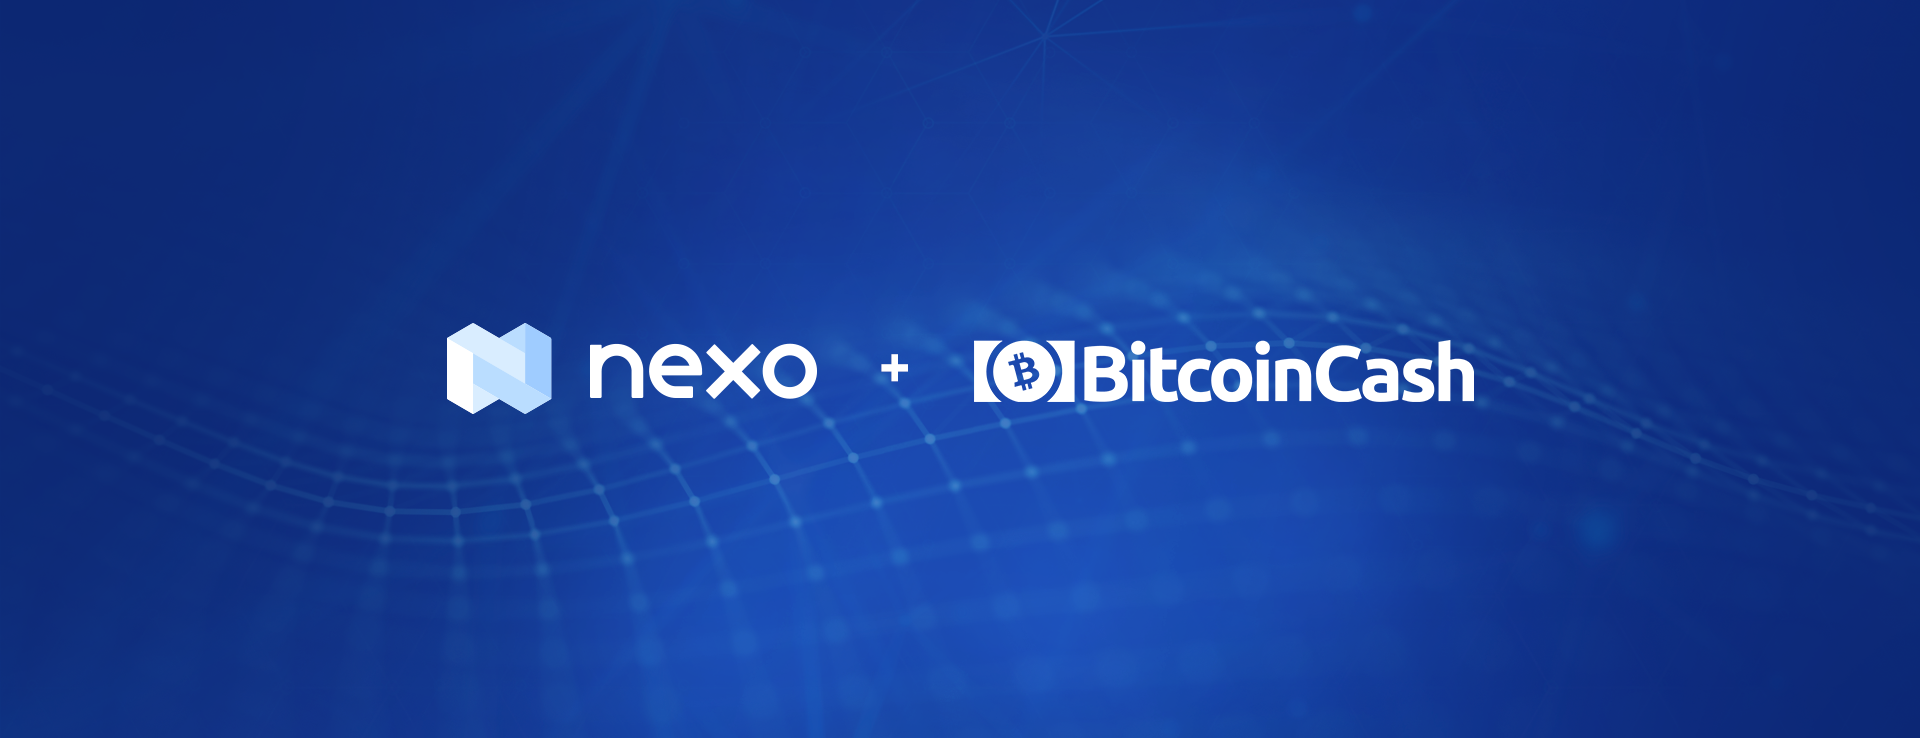 Bitcoin Cash Now Available As Collateral for Nexo’s Instant Crypto Credit Lines